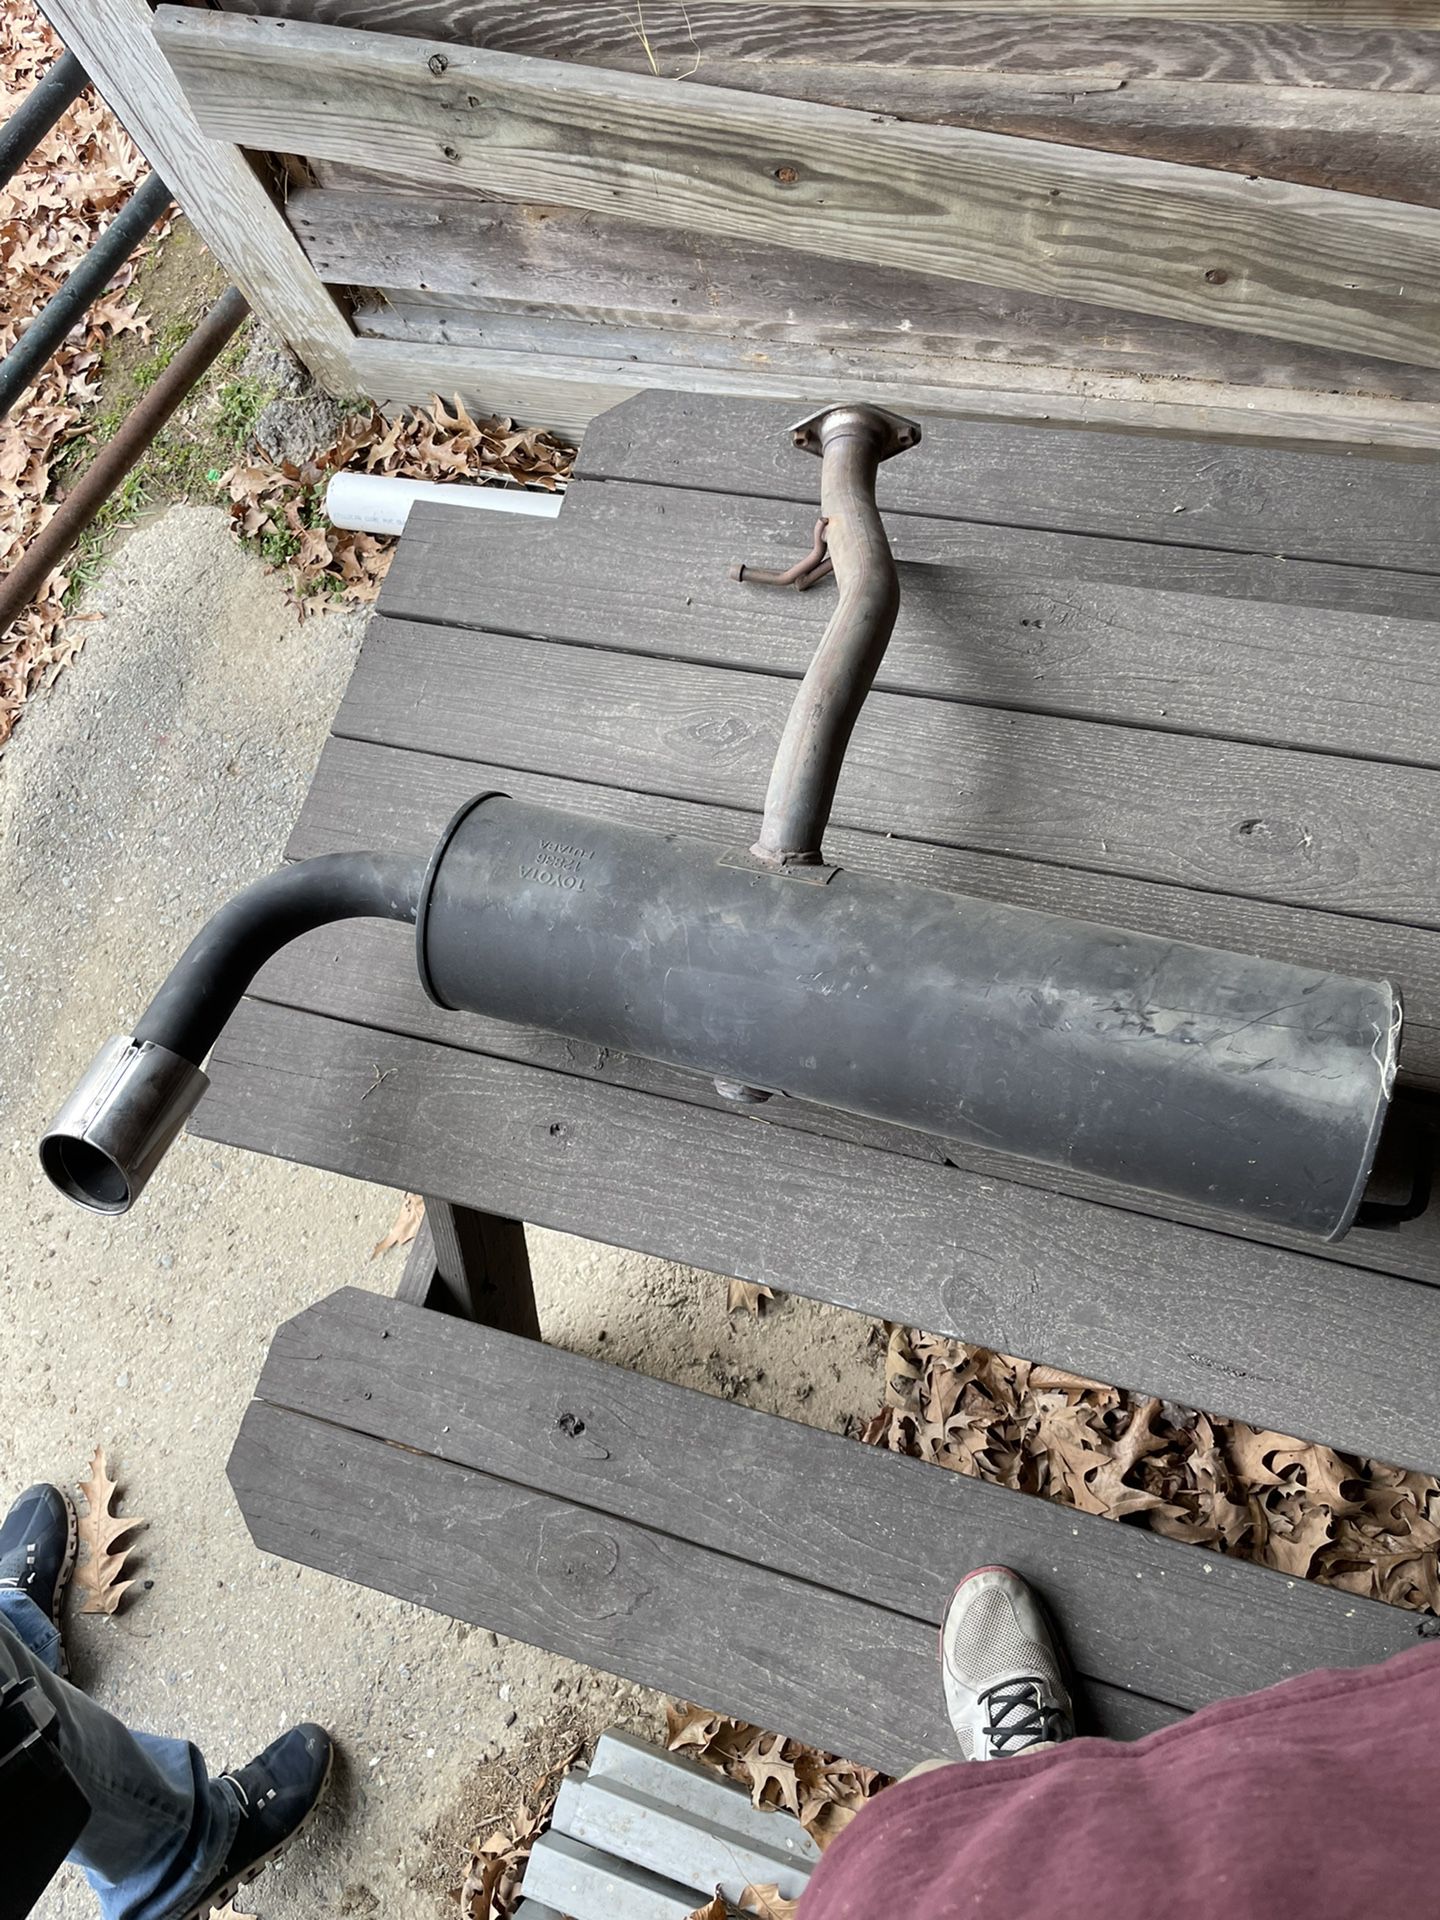 2006 Scion Tc Exhaust And Air Intake 